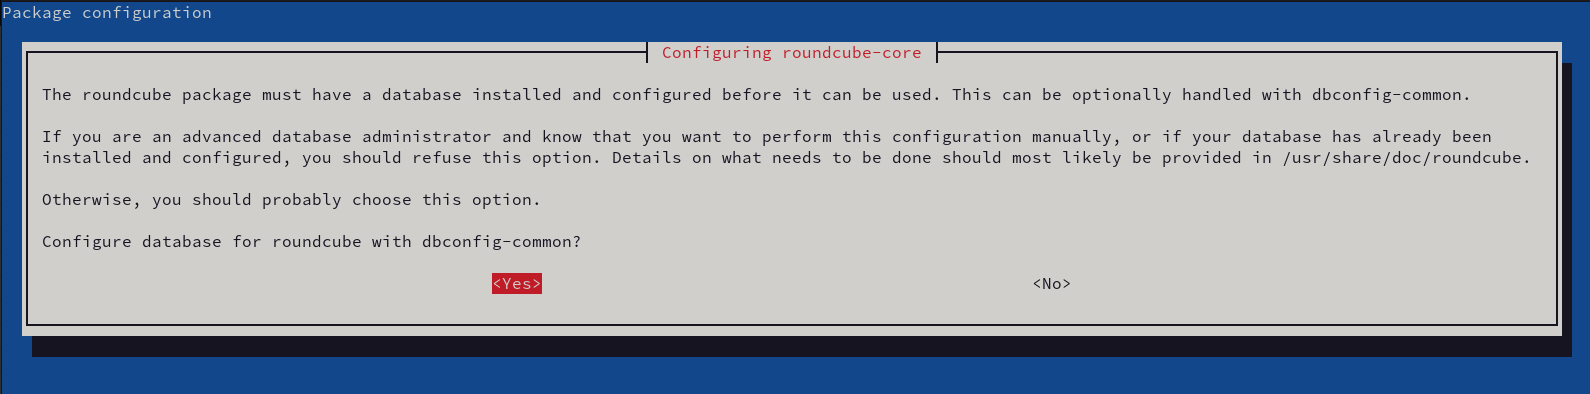 Rouncube package installation process on a Debian asking to configure database